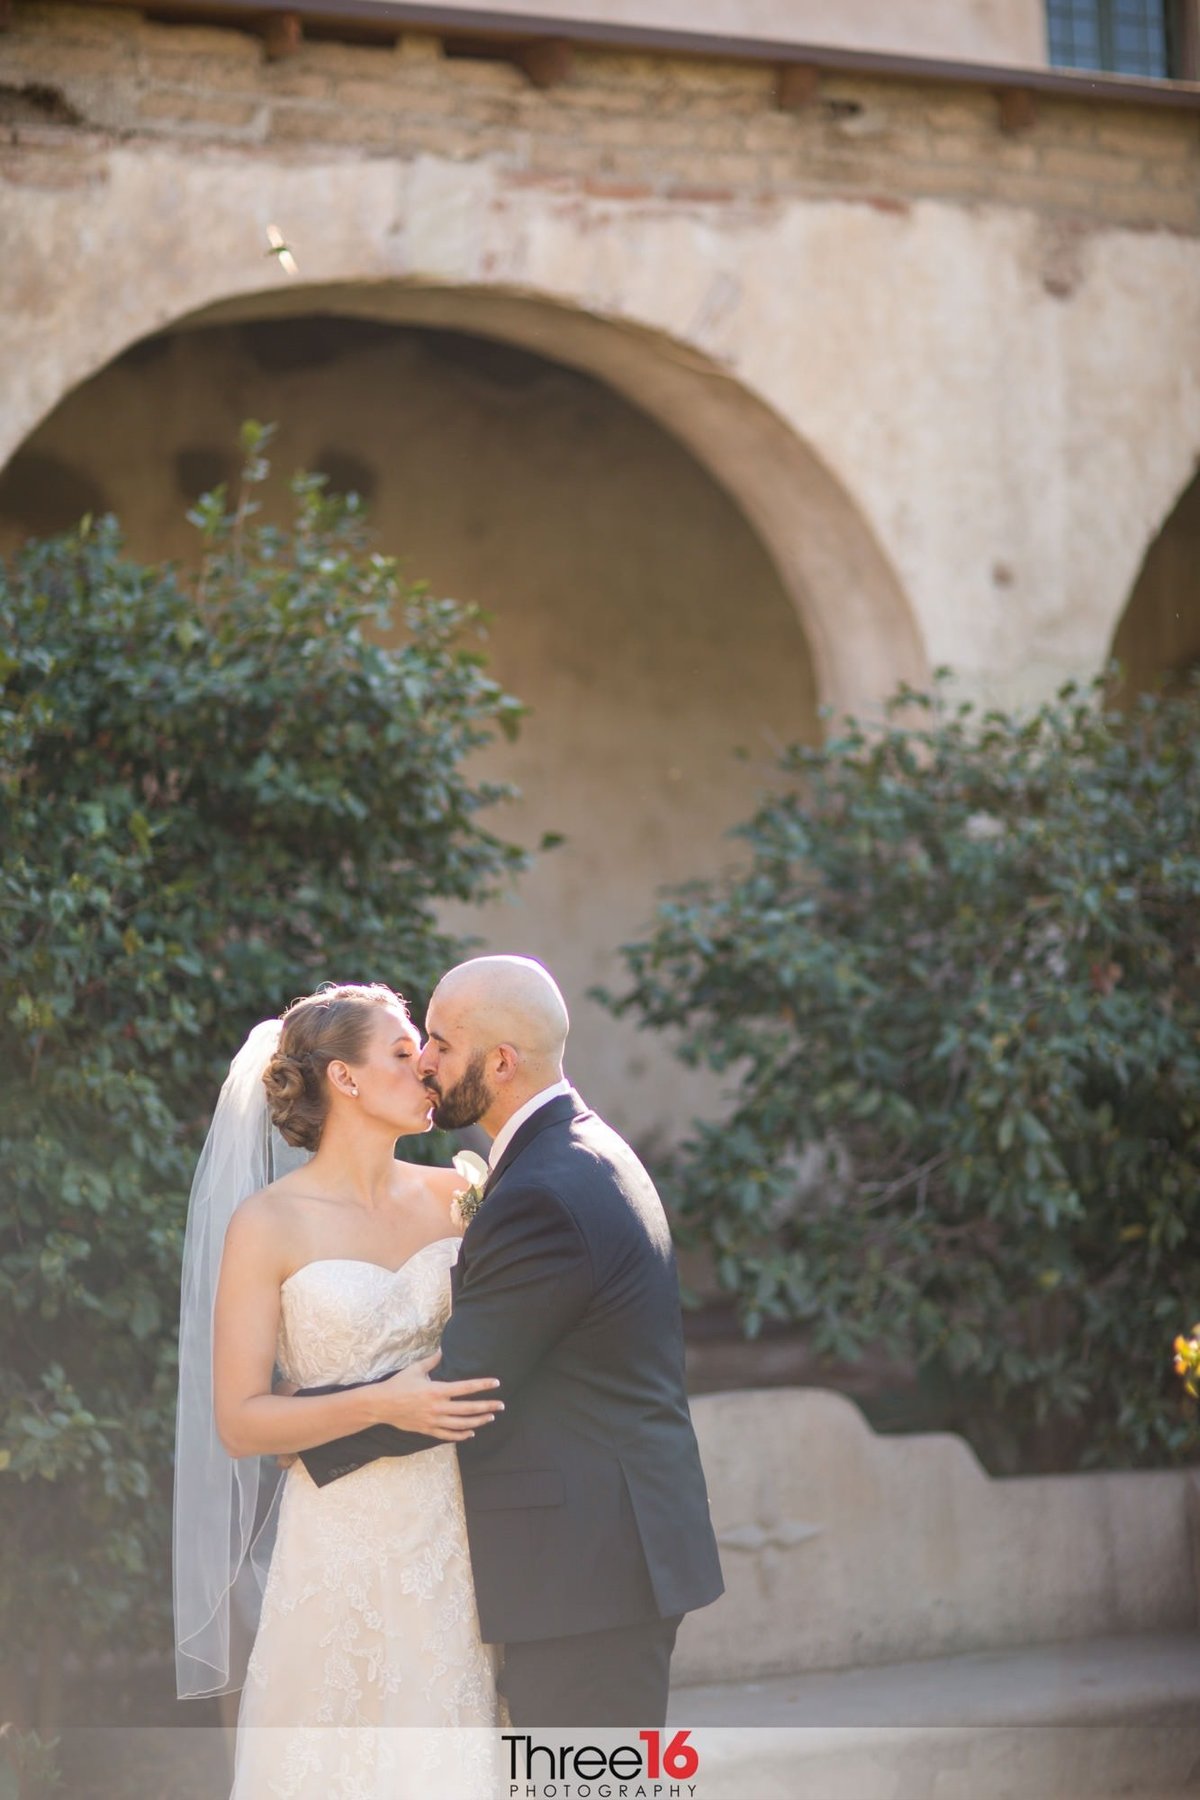 Bride and Groom share a kiss together